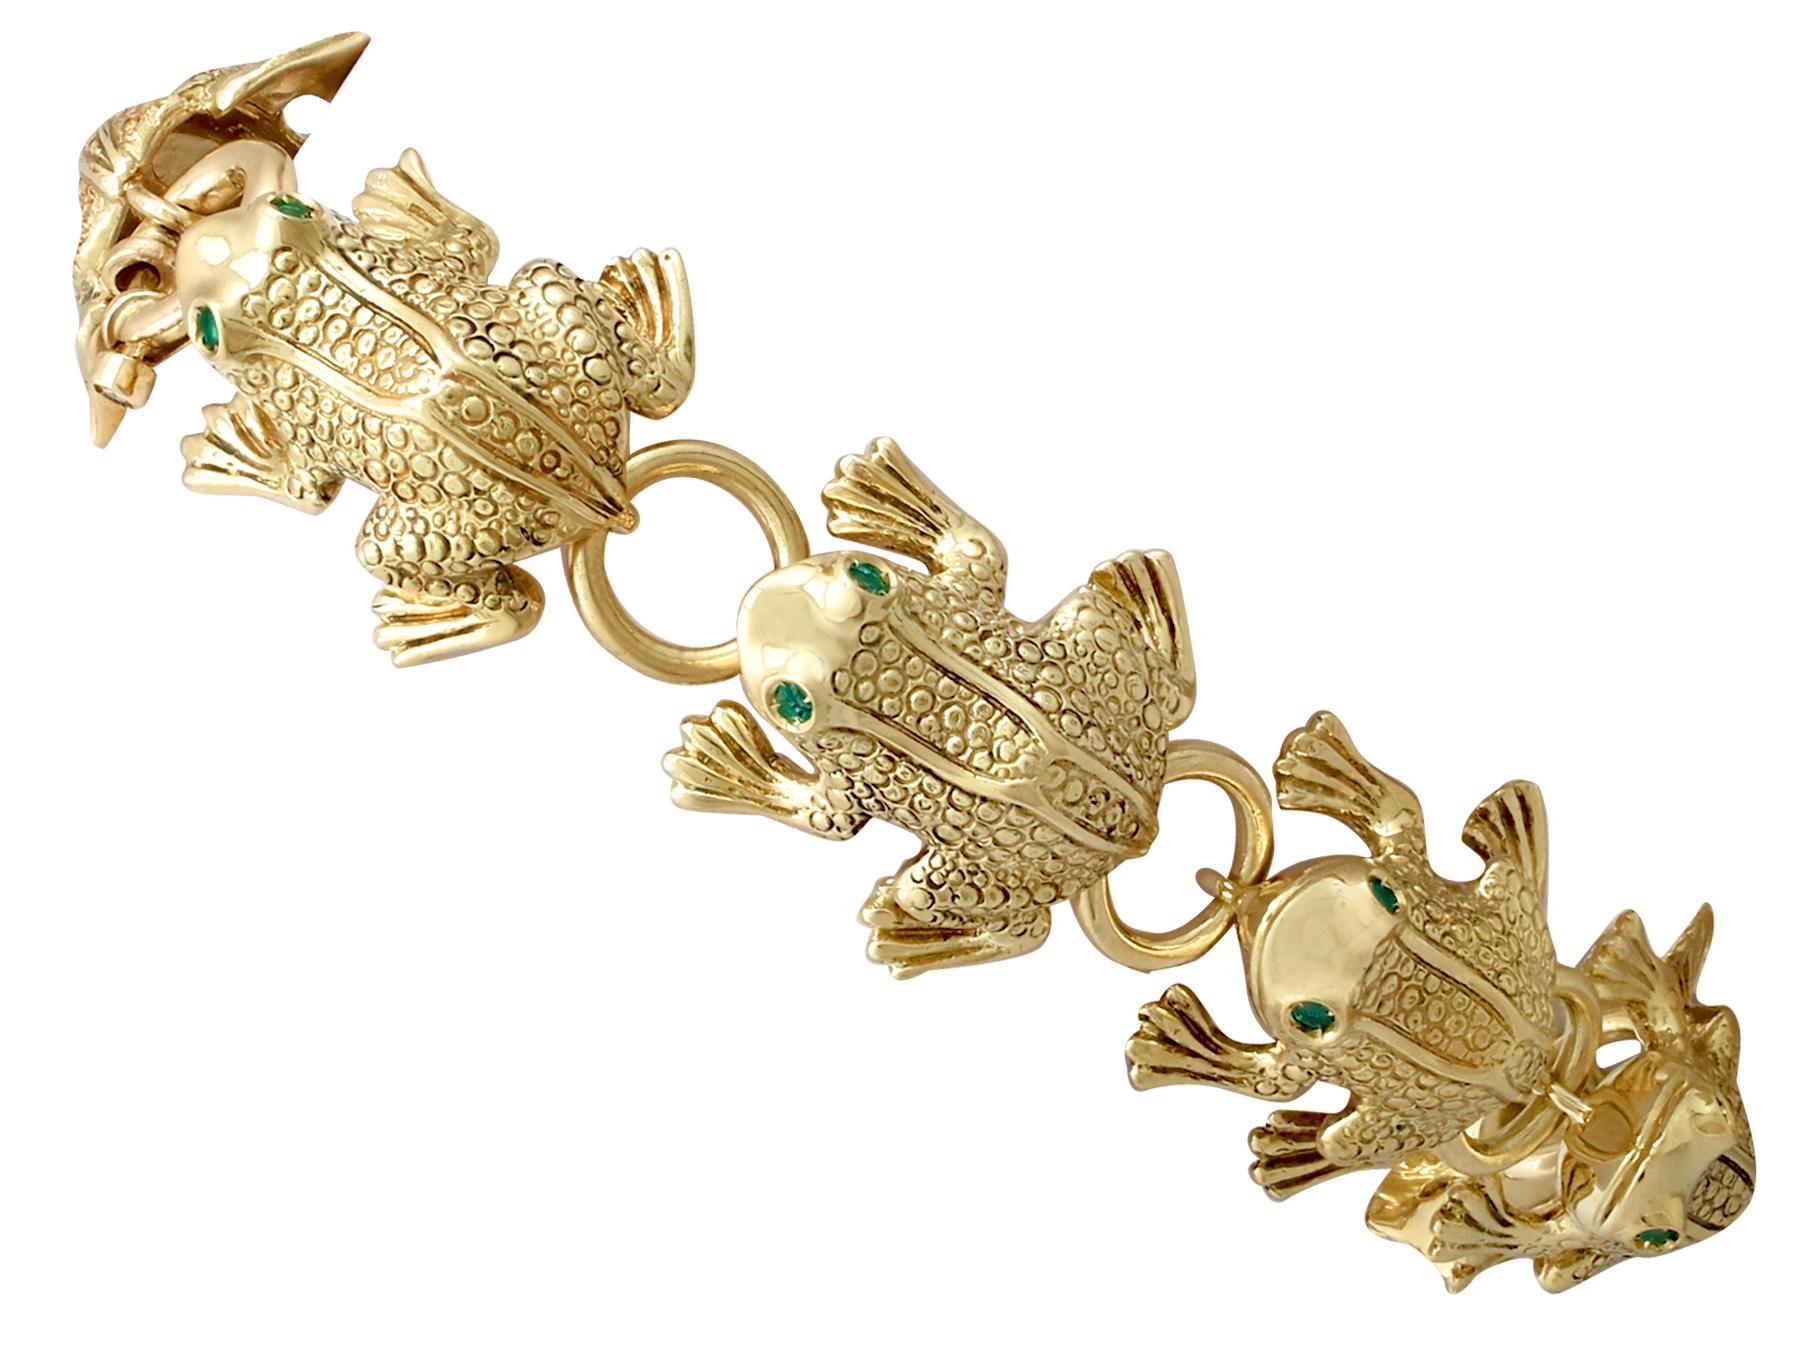 An impressive vintage Italian 0.66 Ct emerald and diamond, 18k yellow gold 'frog' earring and bracelet suite; part of our diverse vintage jewelry collections.

This stunning, fine and impressive gold jewelry set has been crafted in 18k yellow